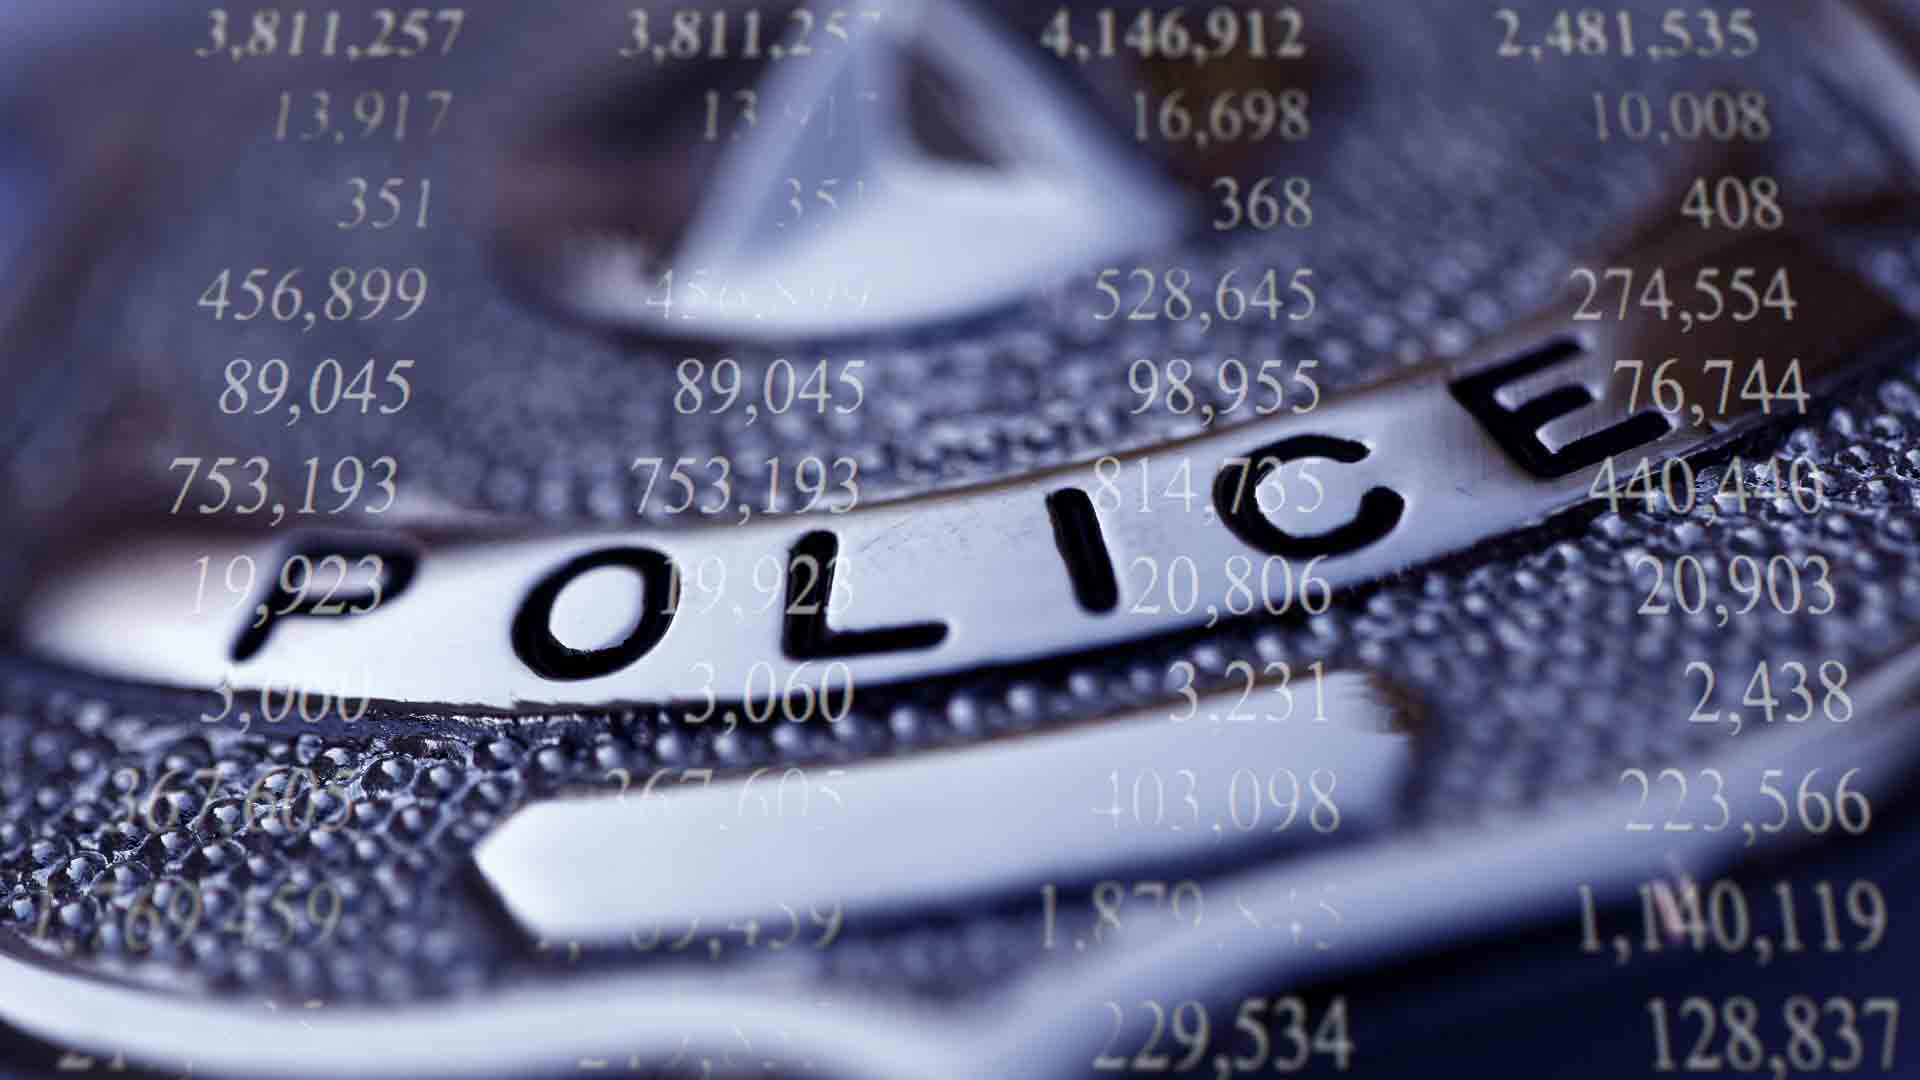 Police Badge with Data Numbers (Stock Image)